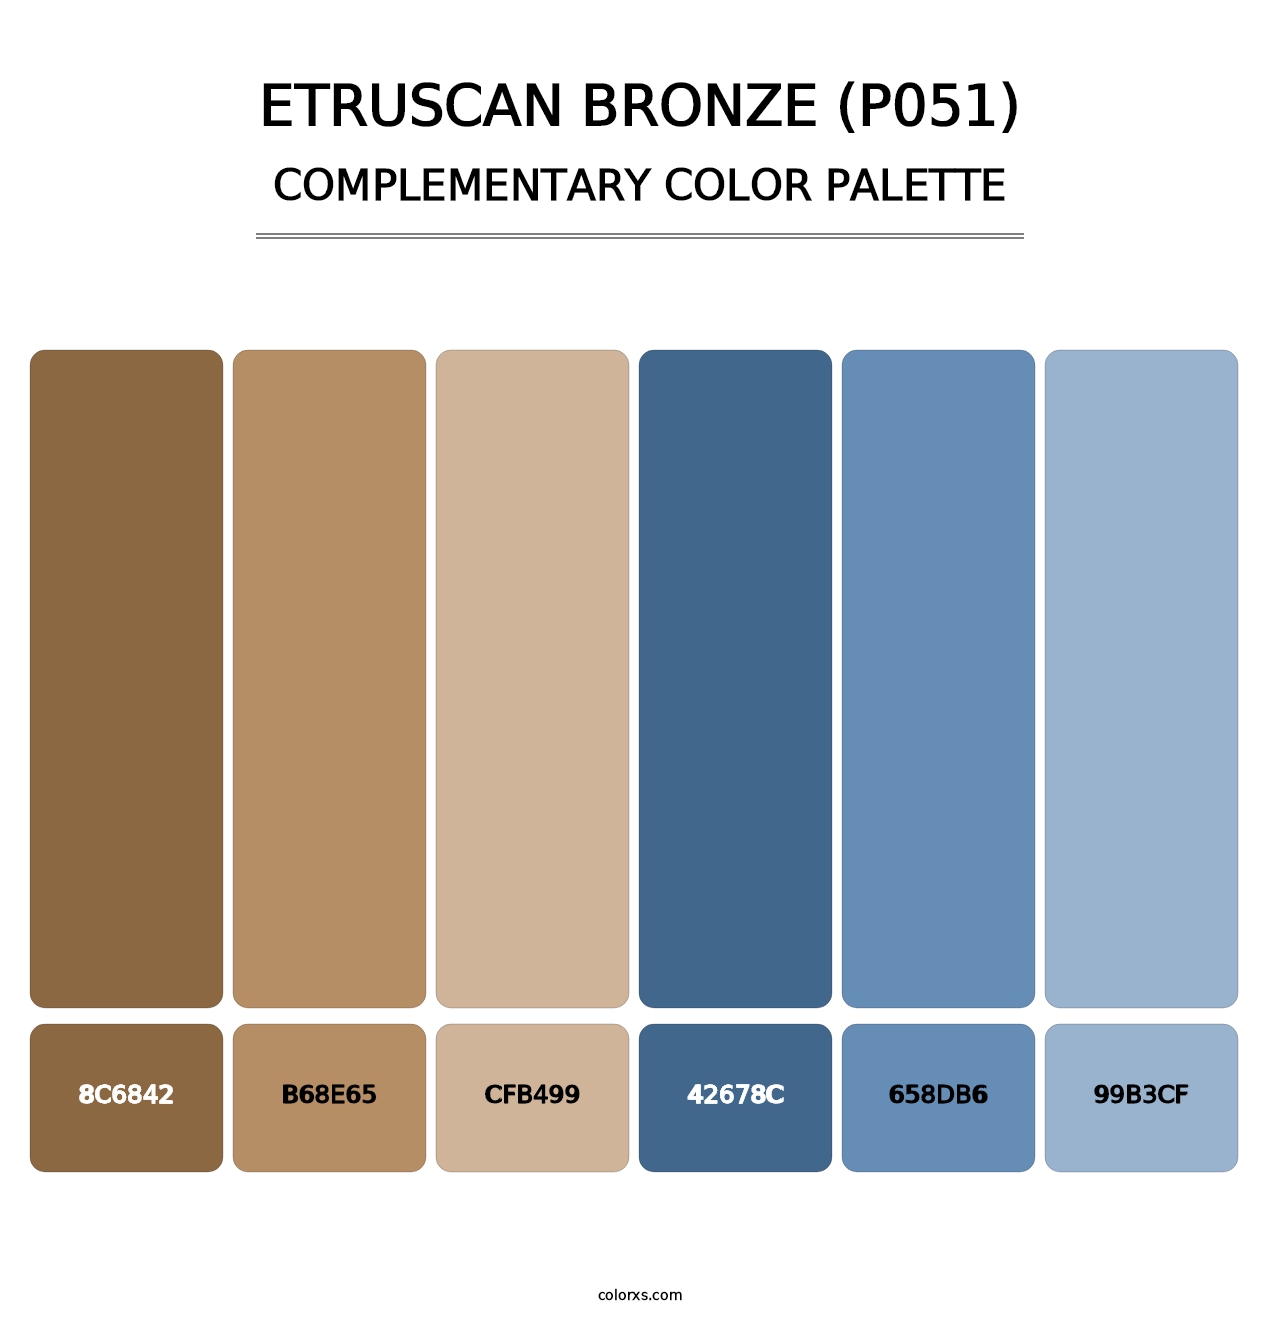 Etruscan Bronze (P051) - Complementary Color Palette